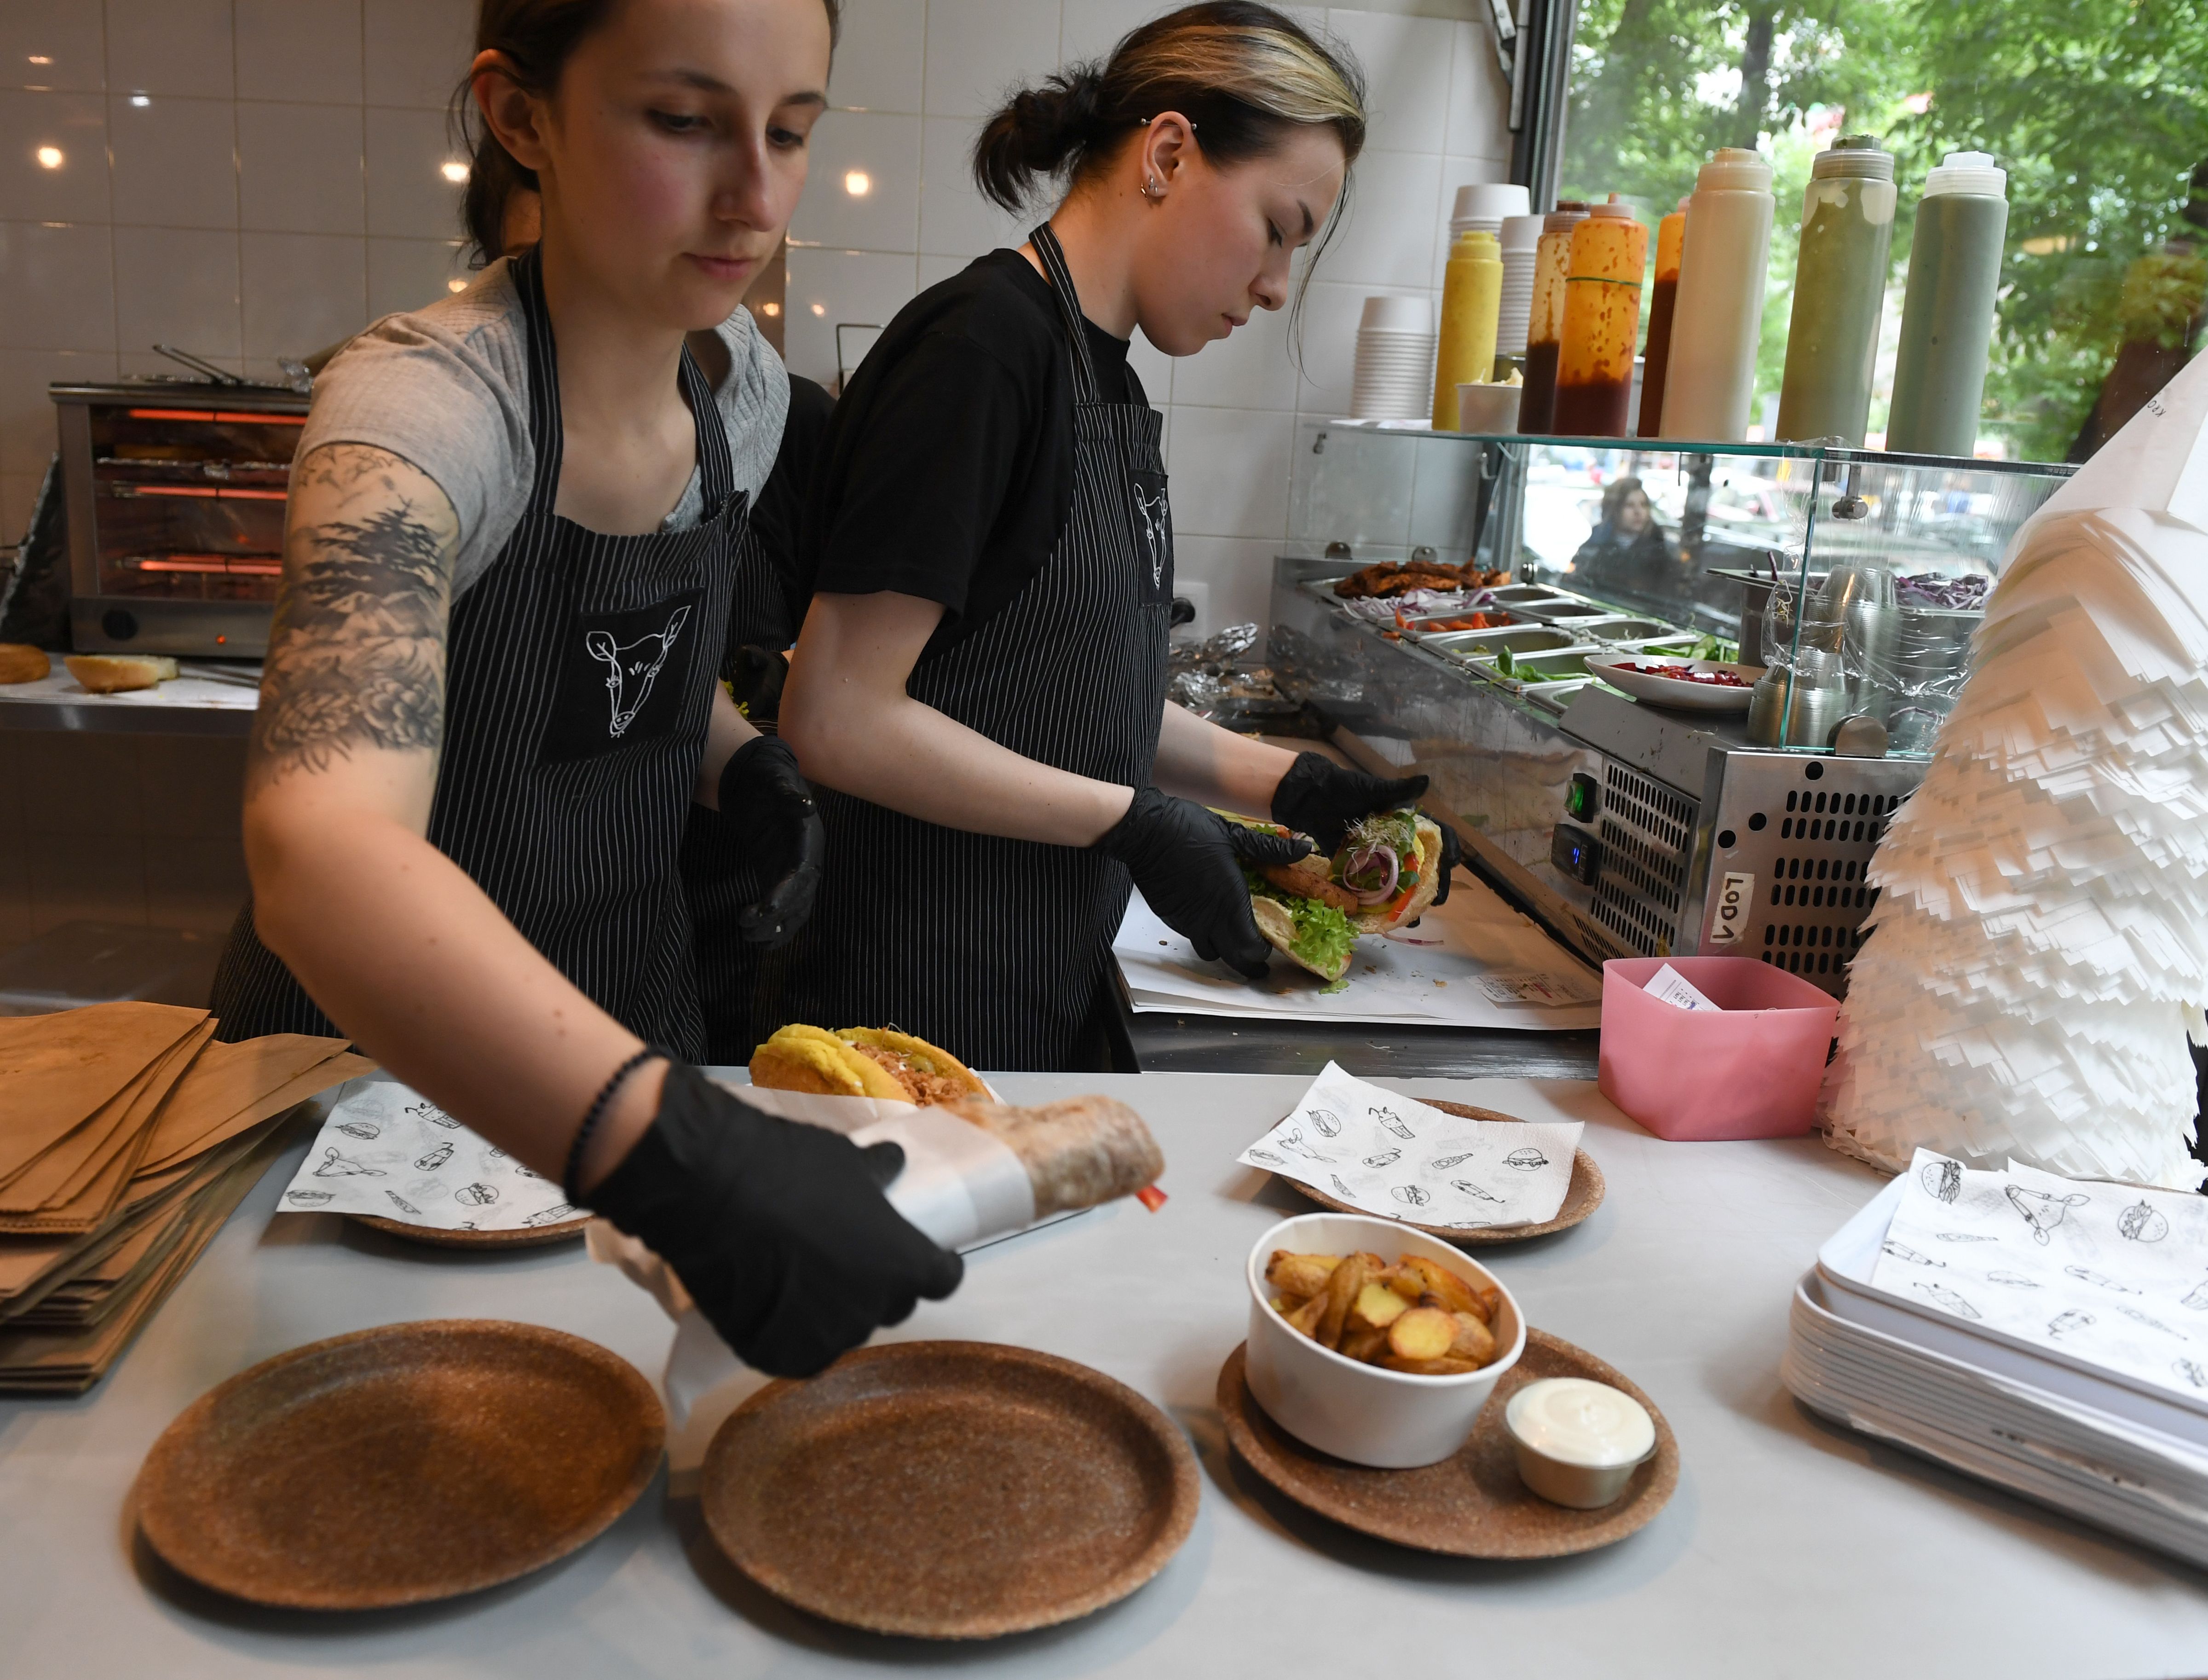 Women working in one of Warsaw's vegan restaurants serve meals on wheat bran plates produced at the Biotrem factory in Zambrow, Poland, on May 29, 2019. - (JANEK SKARZYNSKI/AFP via Getty Images)